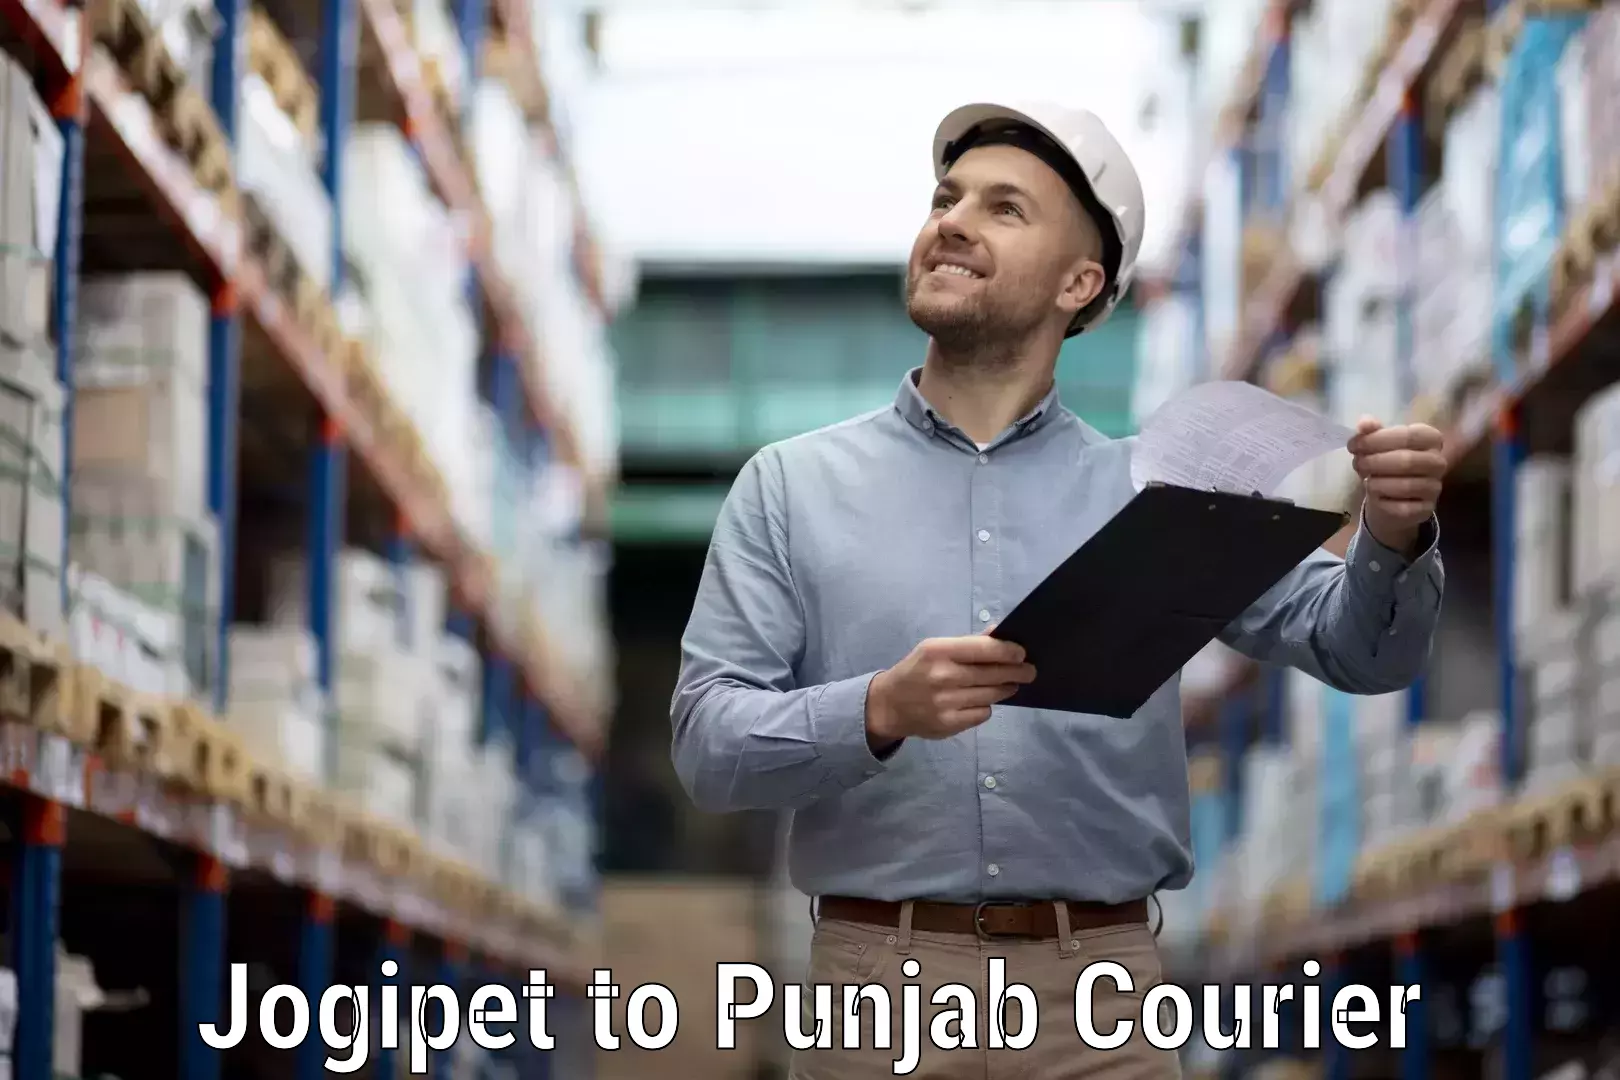 Courier service efficiency Jogipet to Punjab